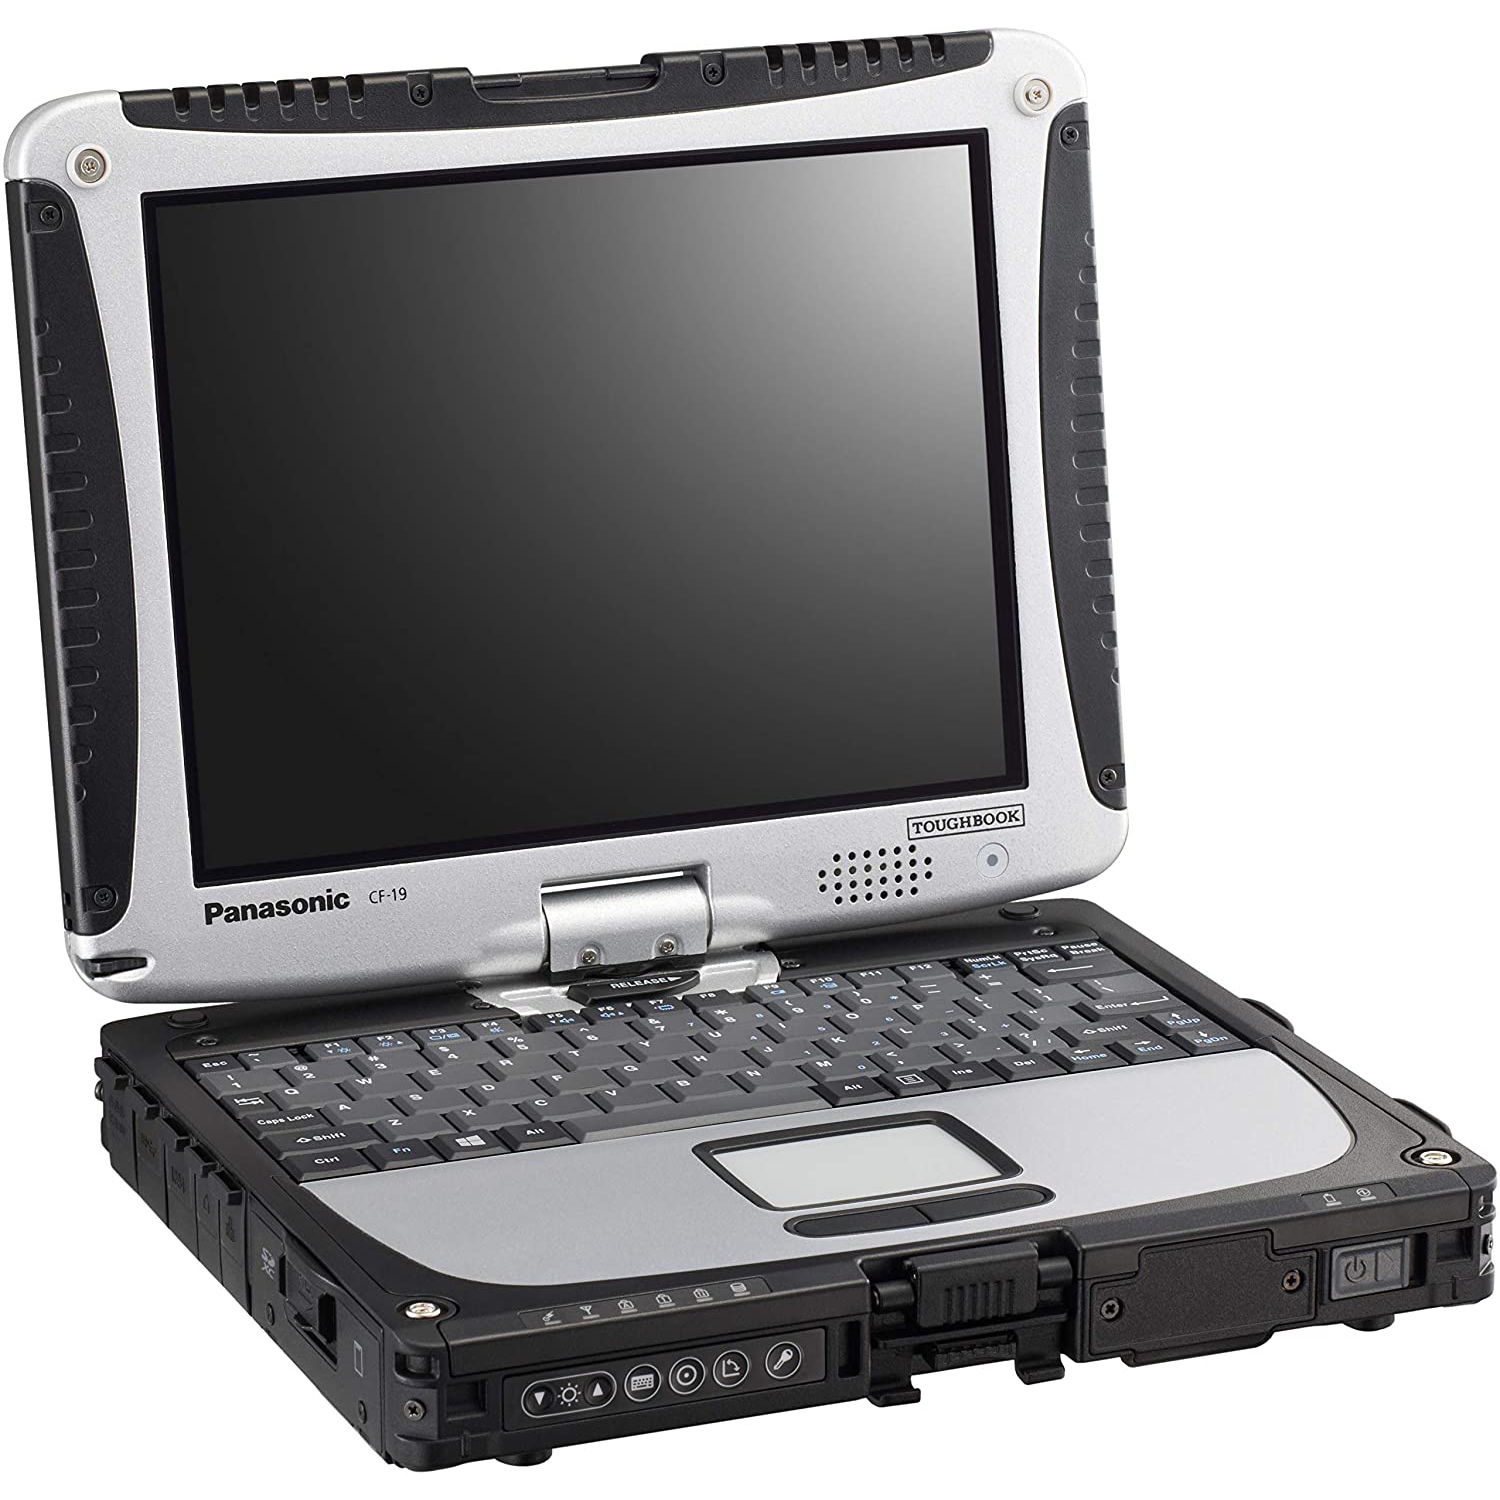 Refurbished (Good) - Panasonic Toughbook CF-19, MK8, 10.1" Touchscreen, Rugged Laptop Convertible Tablet, Intel i5-3610ME @ 2.70GHz, 8GB, 256GB SSD, Win 10 Pro, 4G LTE